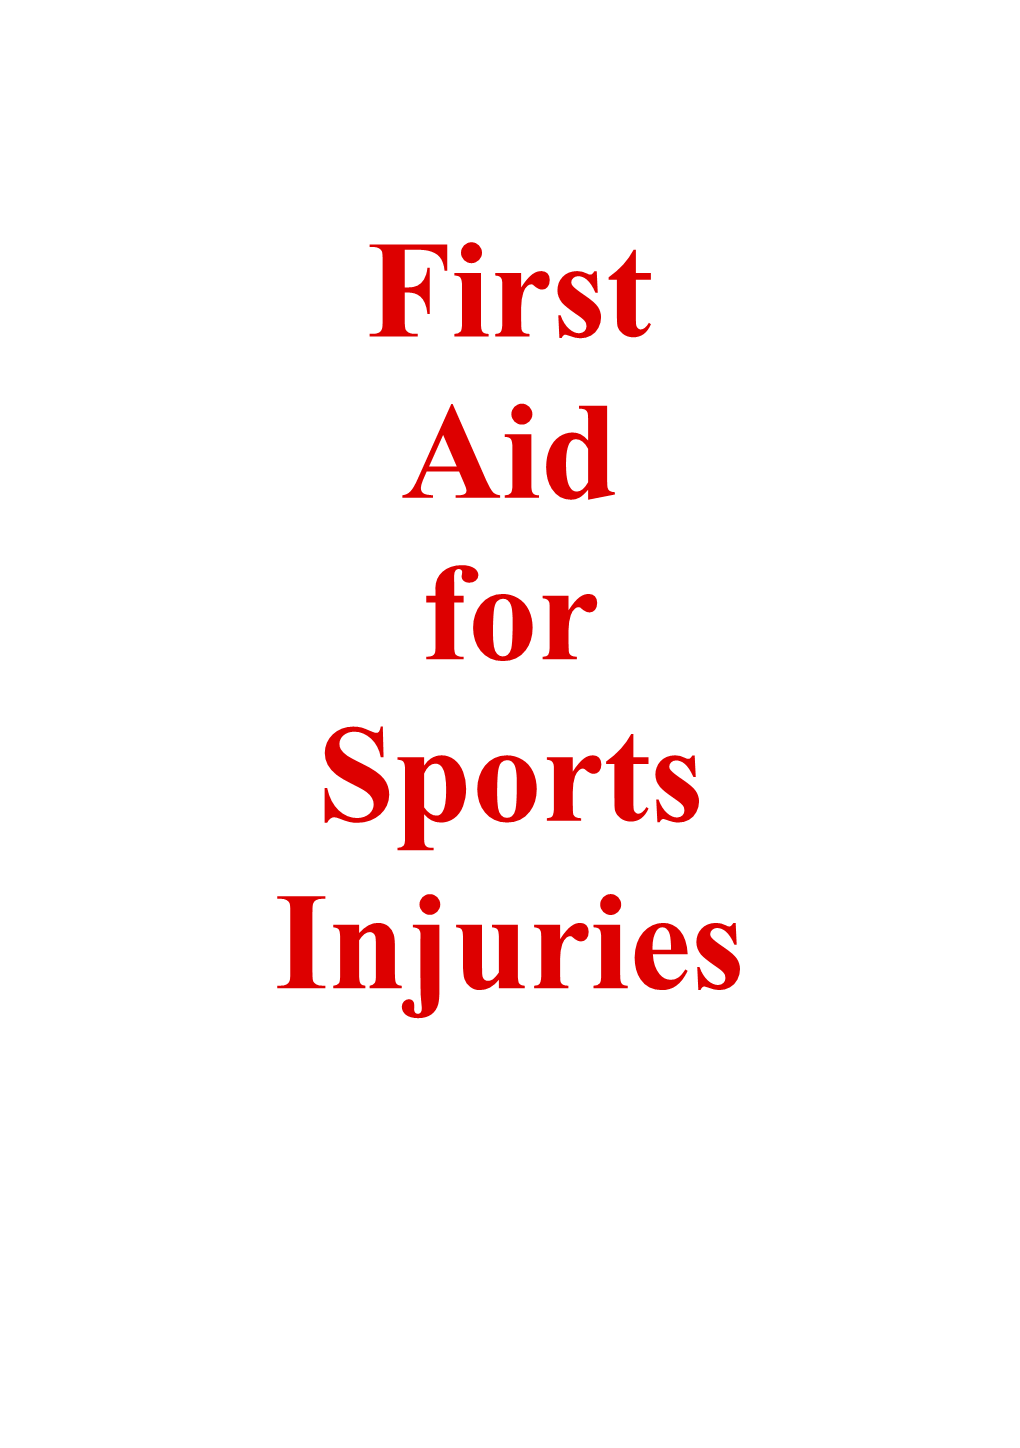 First Aid for Sports Injuries Ebook Edition 1.1